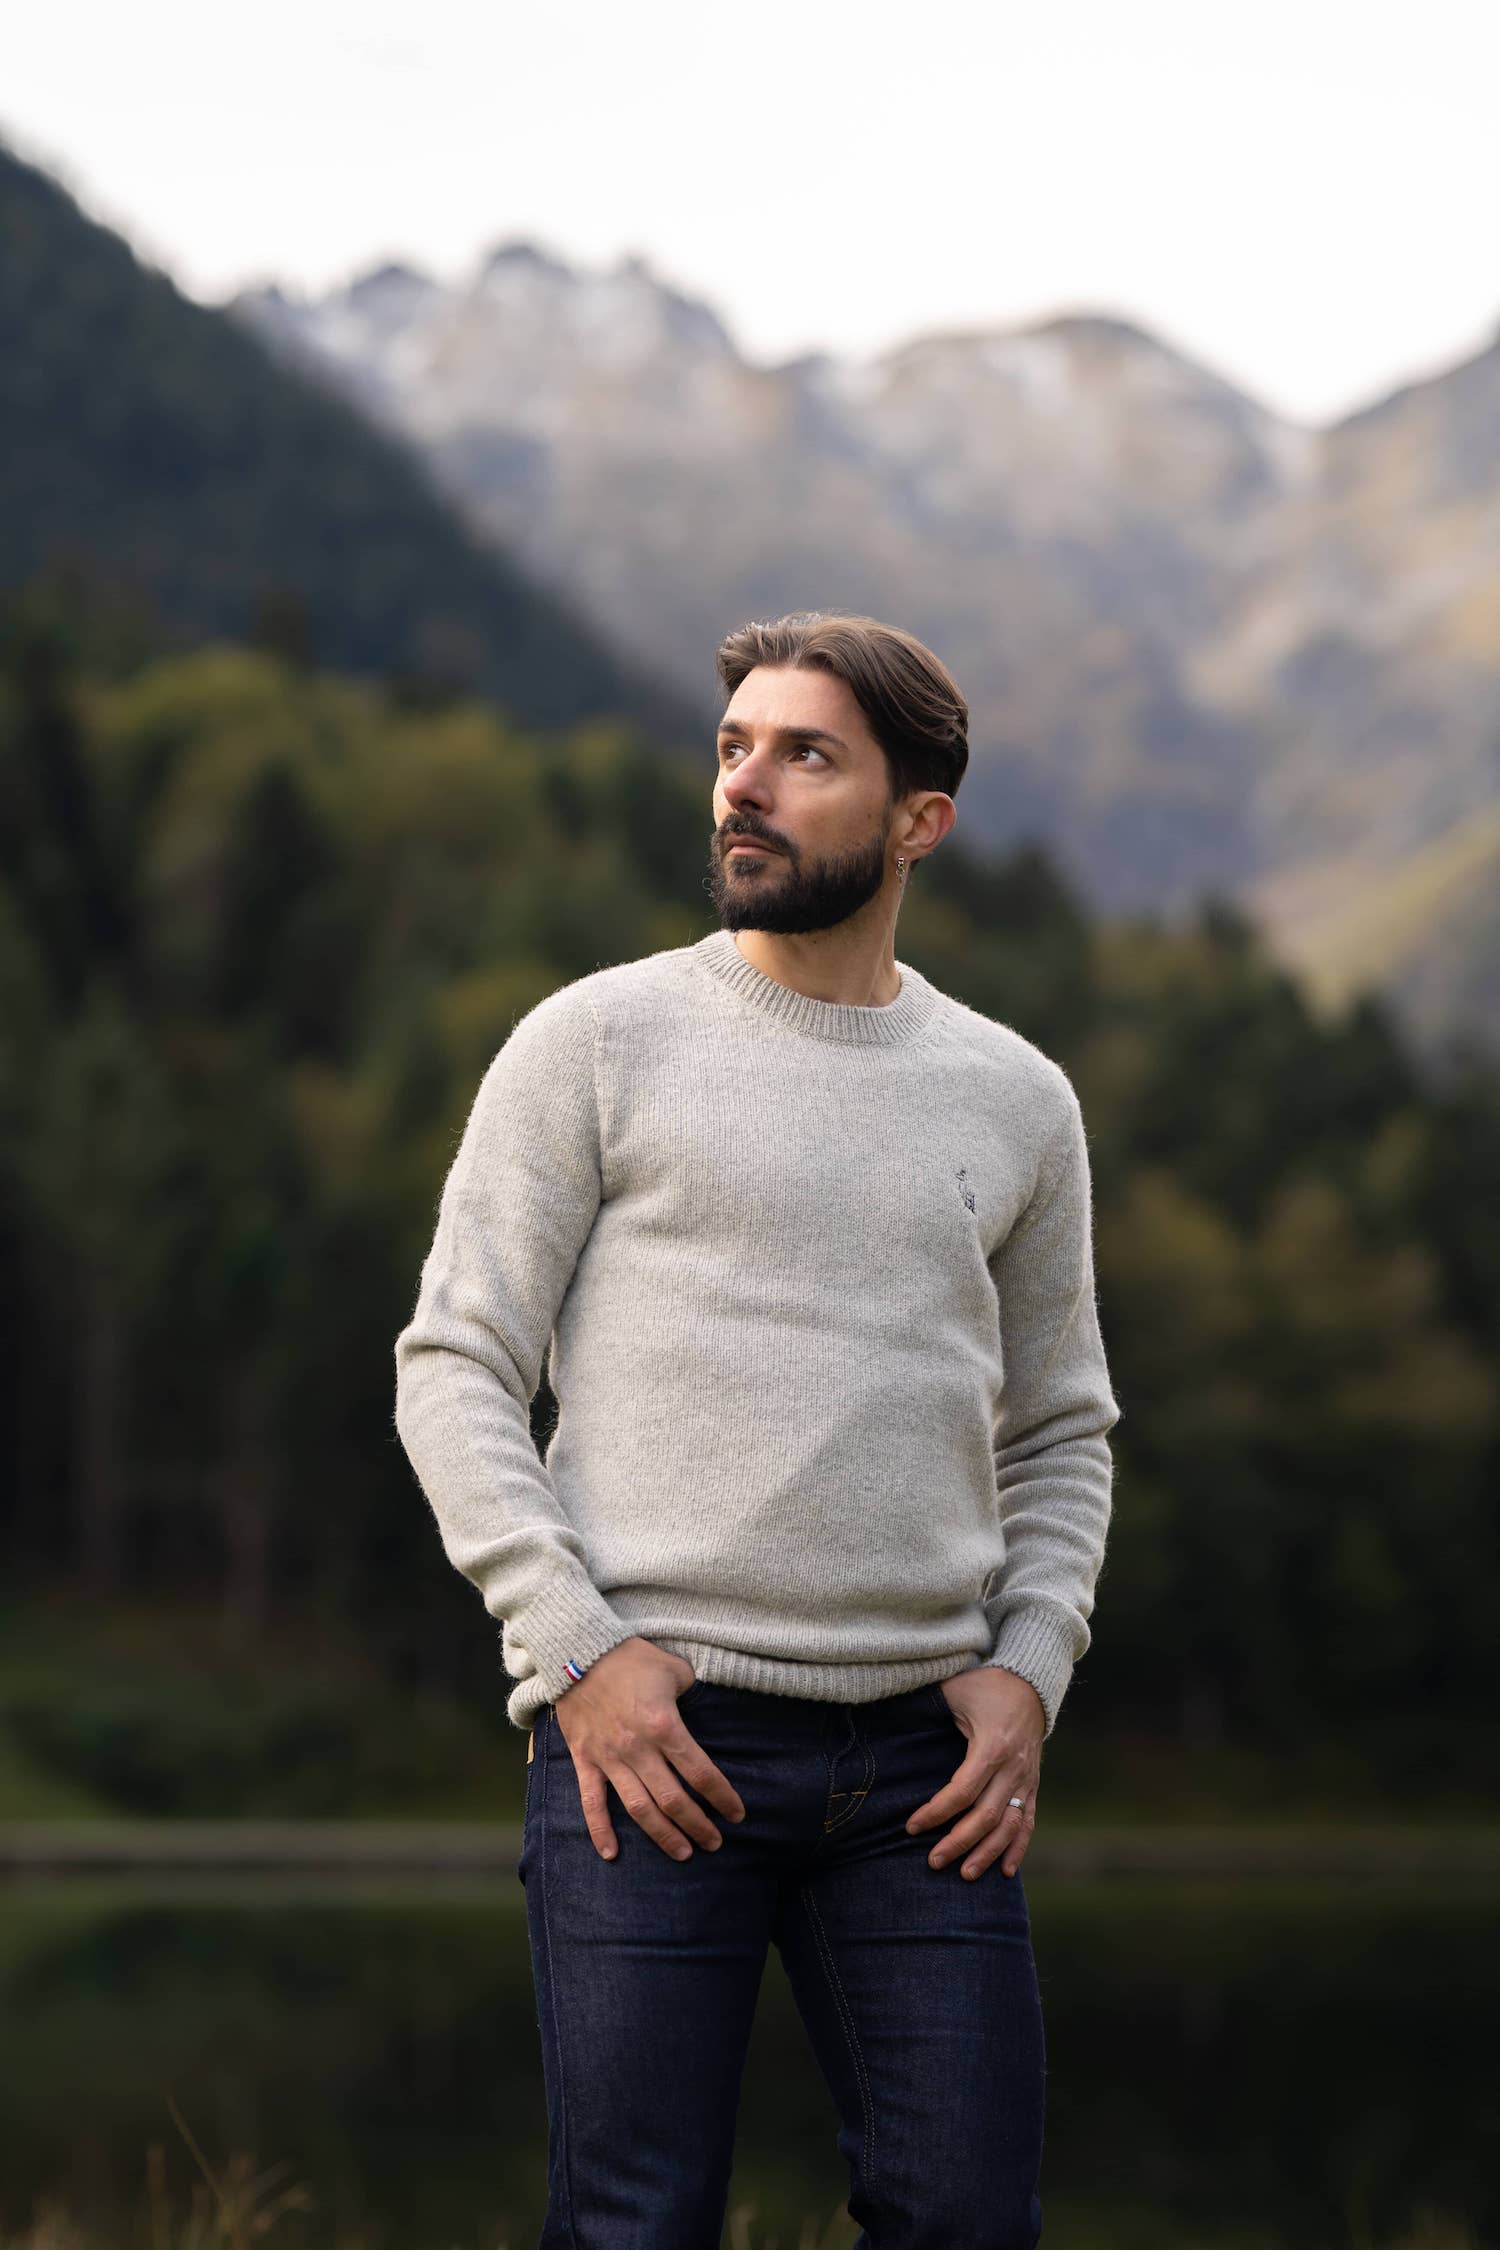 Pull Raglan Homme - Laine Gris Clair - Made in France - Maison Izard